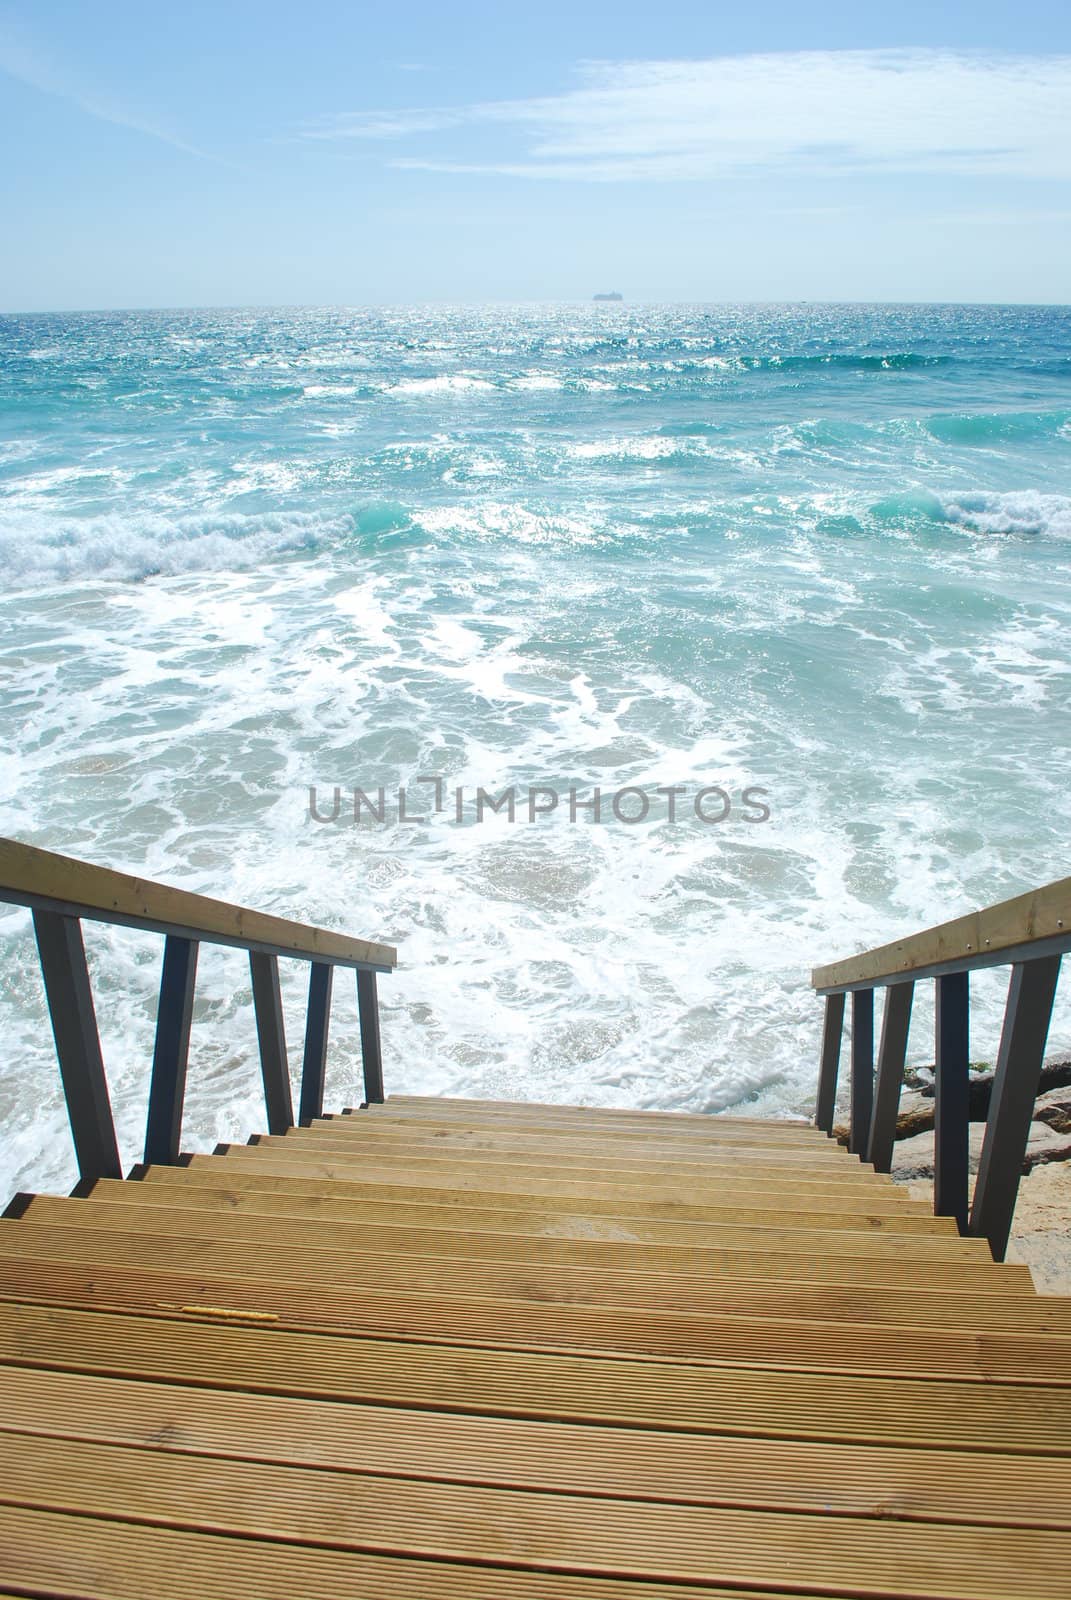 beautiful scene with stairs entering the ocean